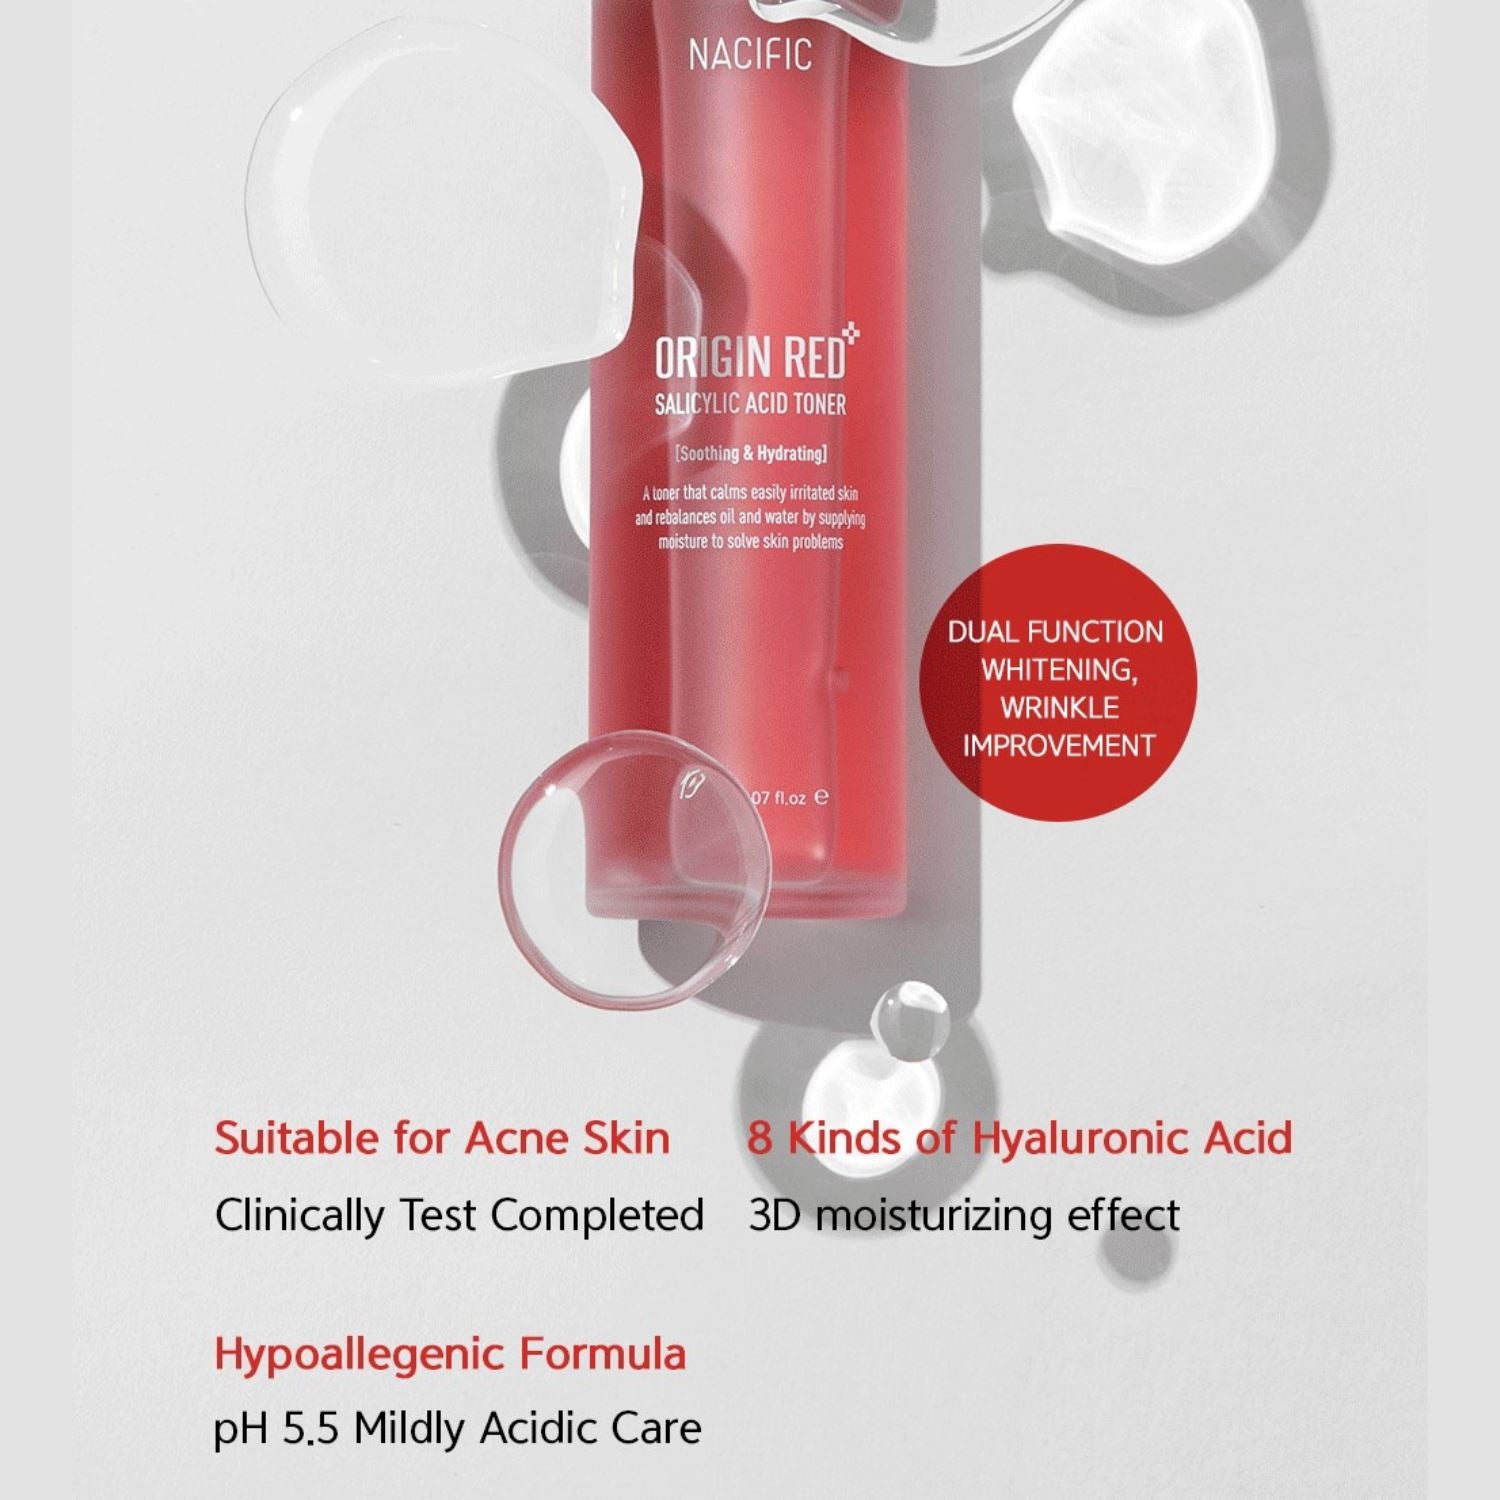 Nacific Origin Red Salicylic Acid Toner 150ml, at Orion Beauty. Nacific Official Sole Authorized Retailer in Sri Lanka!